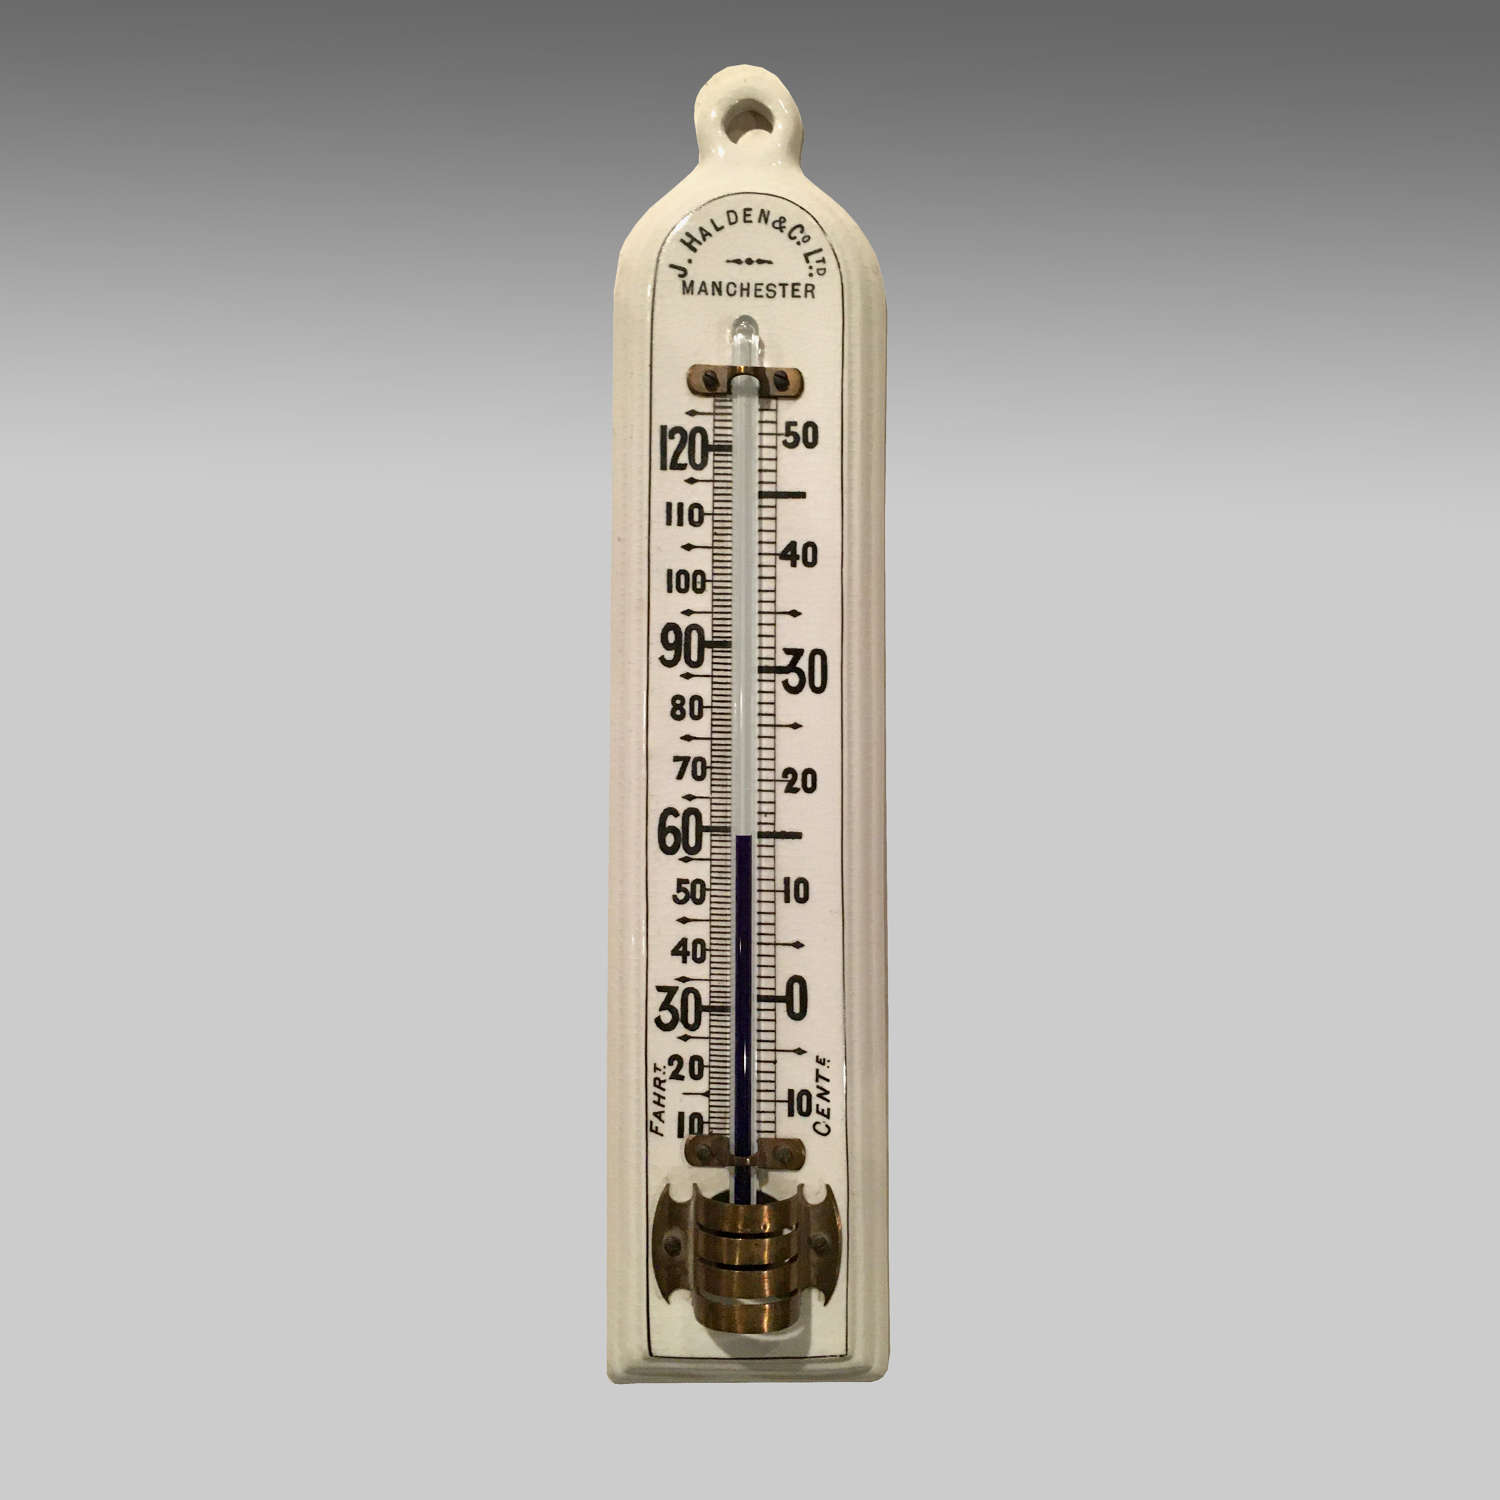 19th century porcelain thermometer